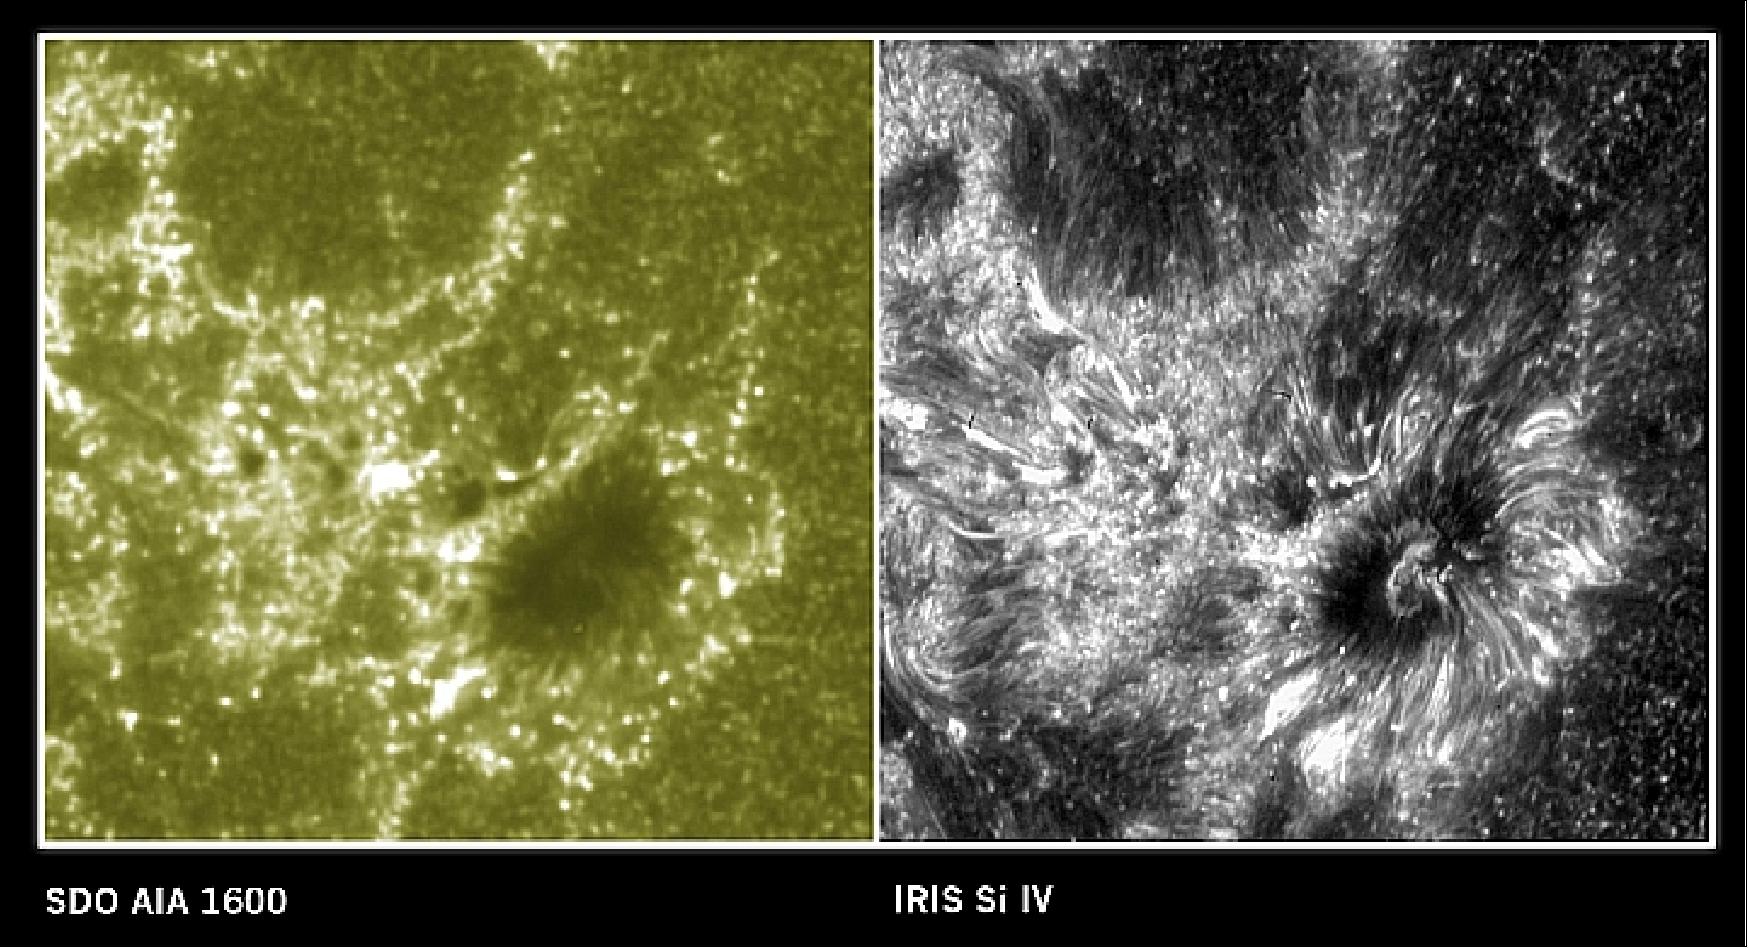 Figure 25: These two images show a section of the sun as seen by IRIS (right) and by the SDO mission (left), acquired on July 17, 2013 (image credit: NASA)